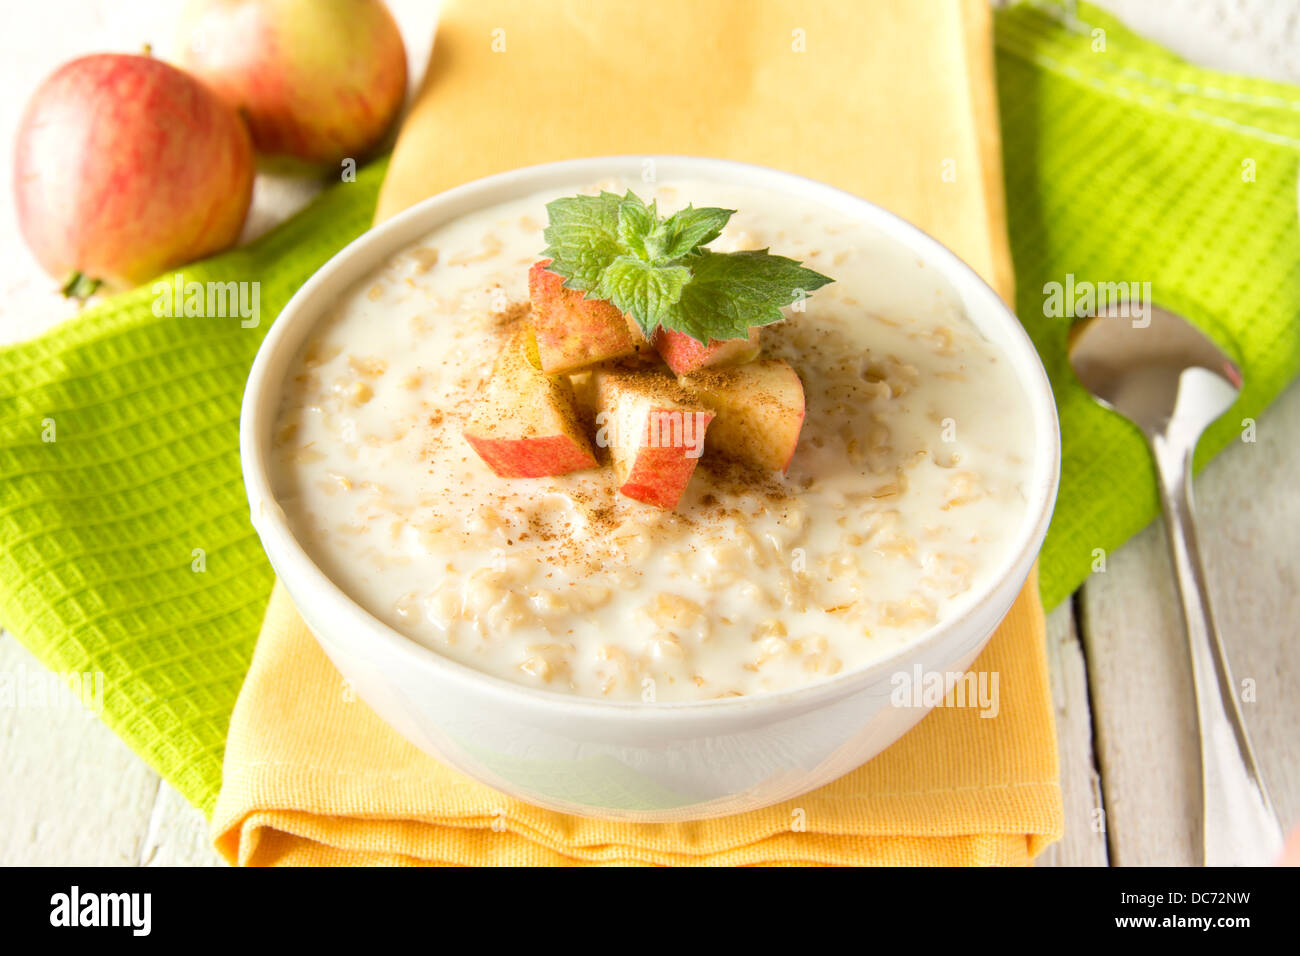 Fresh tasty hot oatmeal porridge with apple slices, mint, cinnamon and spoon on napkin and wooden table. Healthy natural vegetar Stock Photo